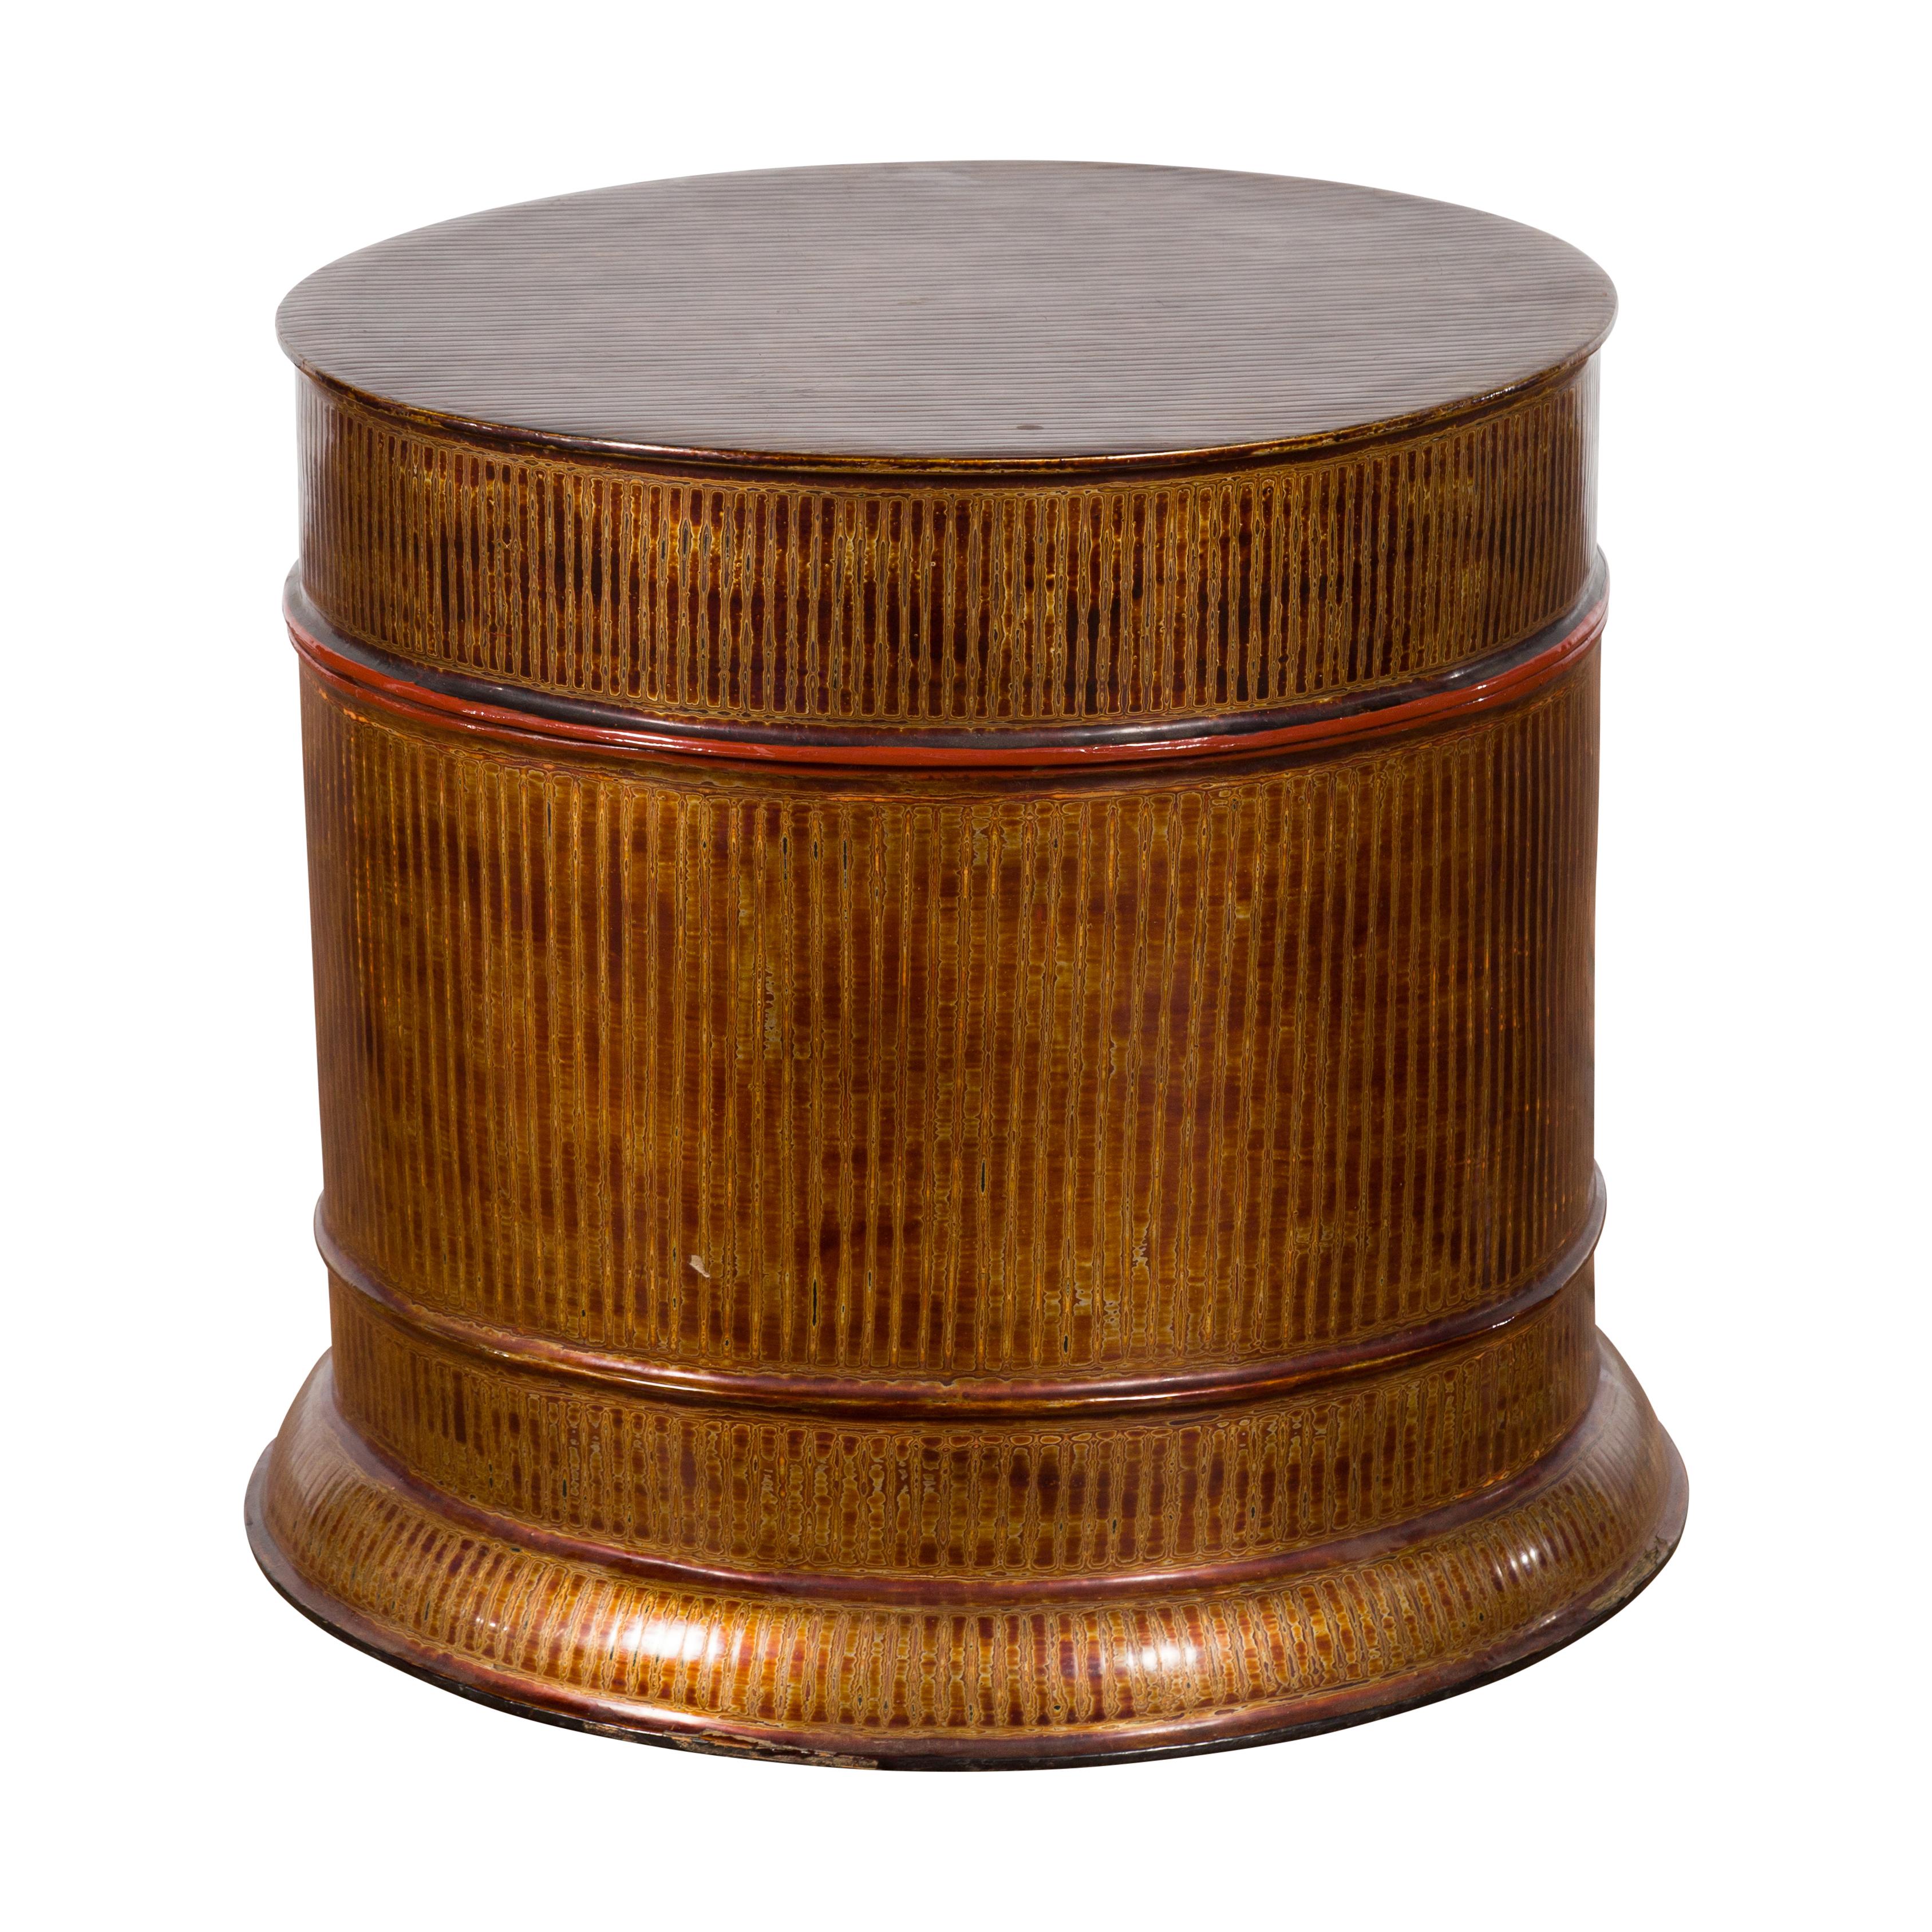 A vintage Burmese negora lacquer round storage bin box from the mid-20th century, with vertical stripes. Created in Burma during the 20th century, this large decorative box features a negora lacquered body resting on a circular base. Showcasing red